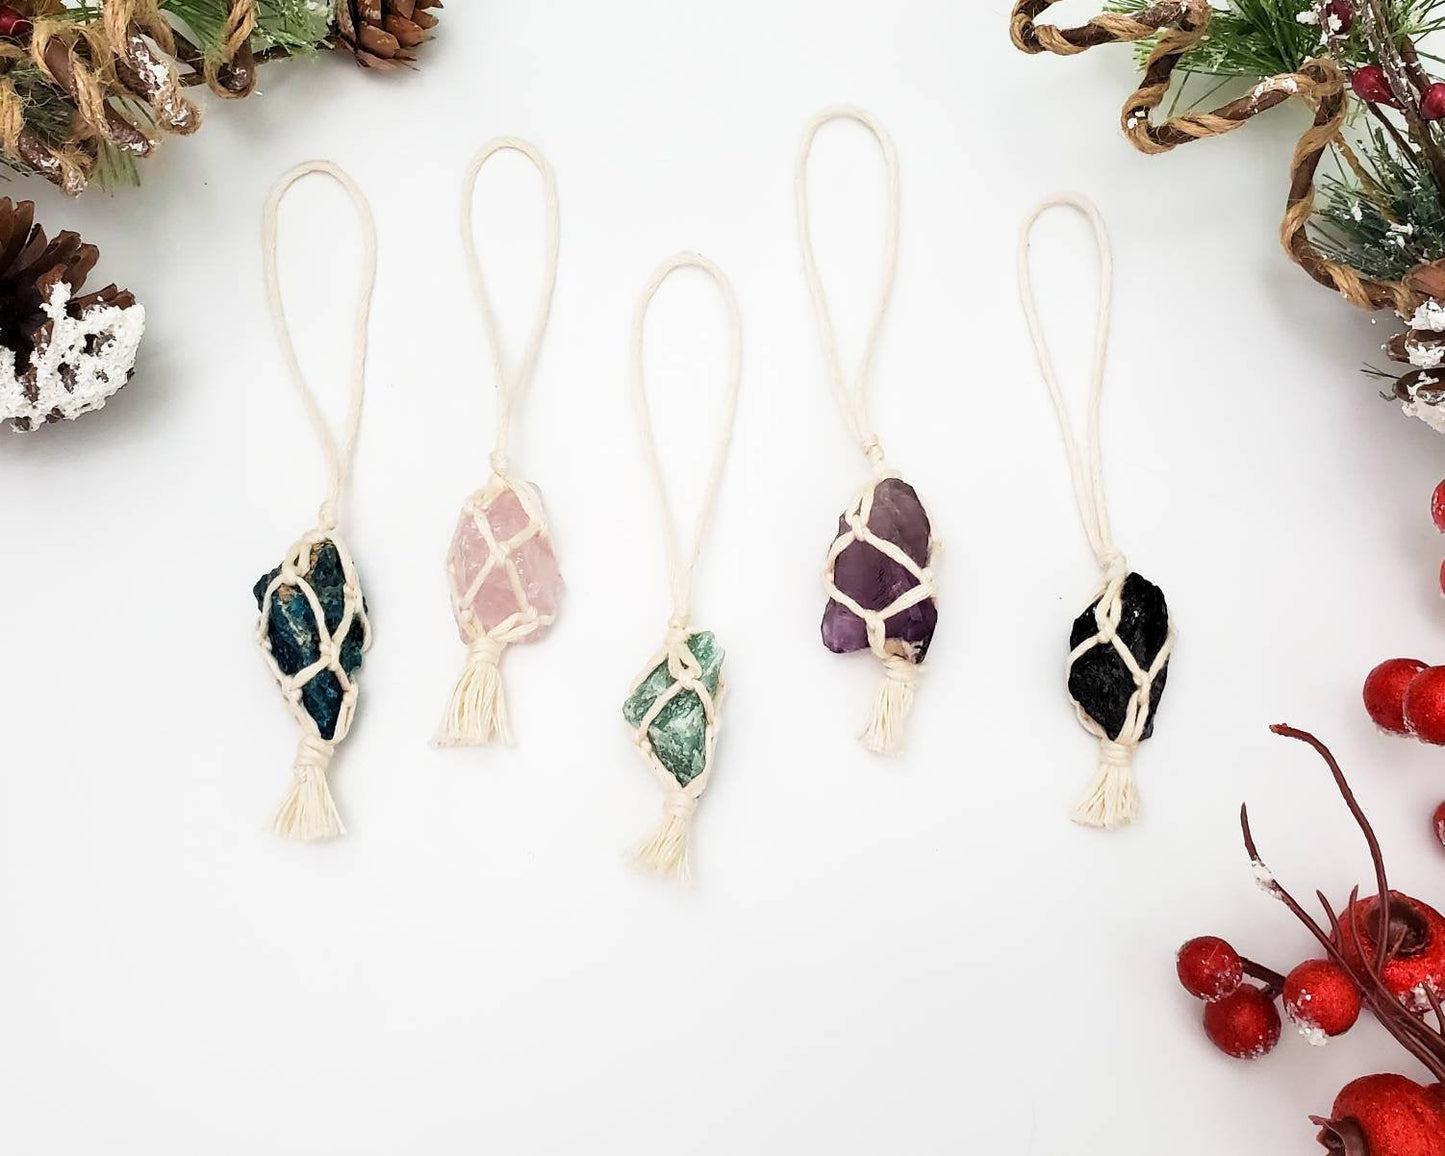 Crystal Christmas ornaments.  Metaphysical healing stones hangers. Boho Christmas ornaments. Ethically sourced crystal charms. Raw stones.